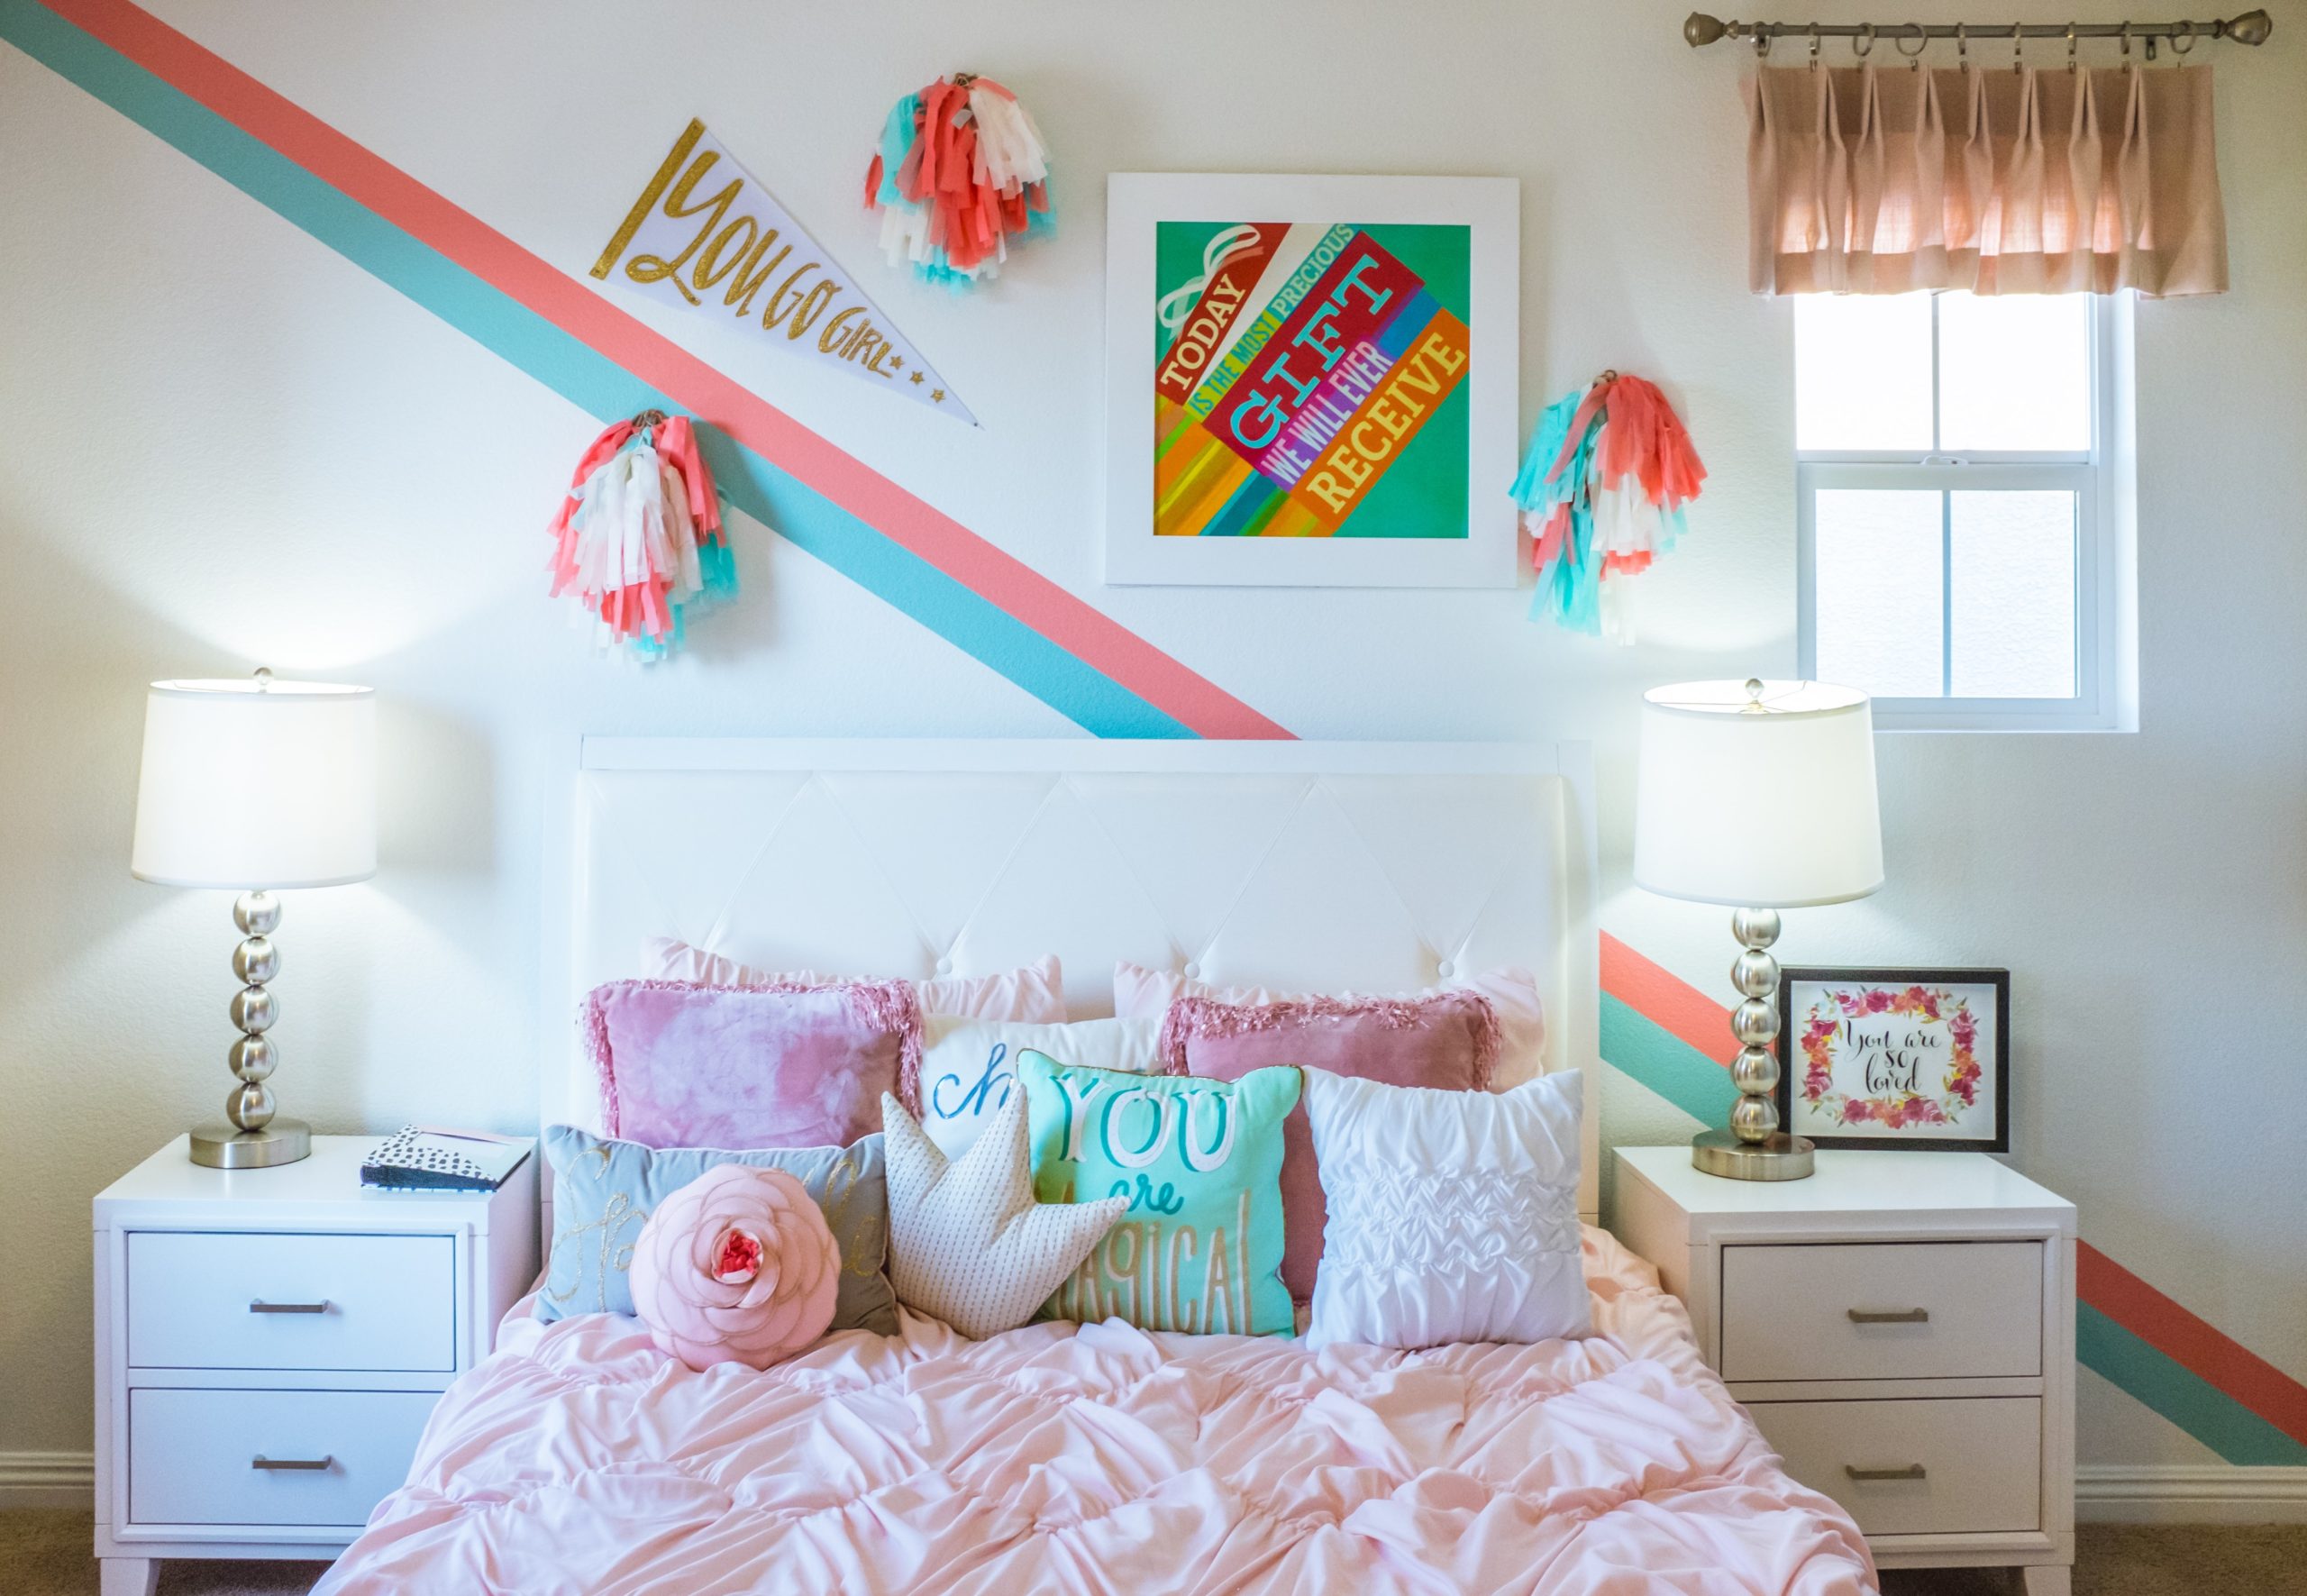 Image of a mural in a bedroom